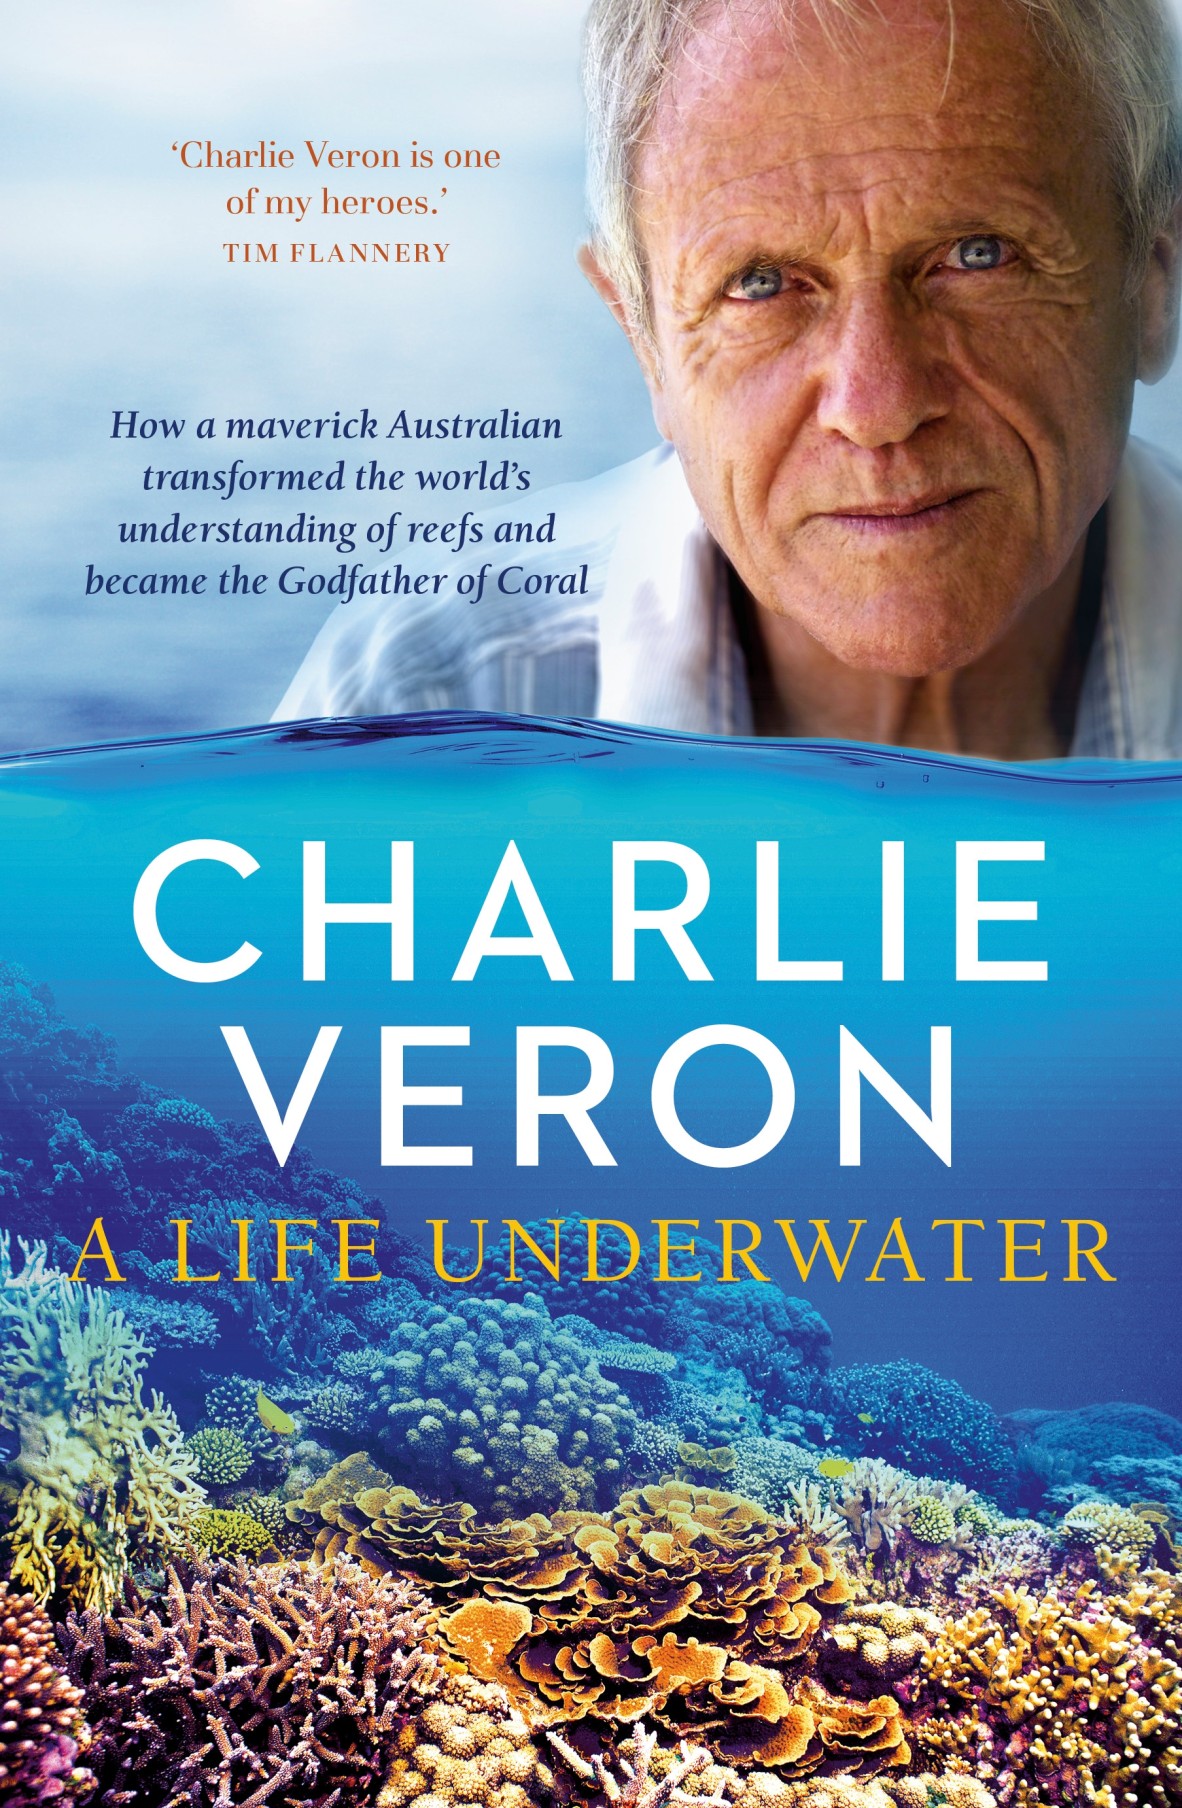 A Life Underwater by Charlie Veron